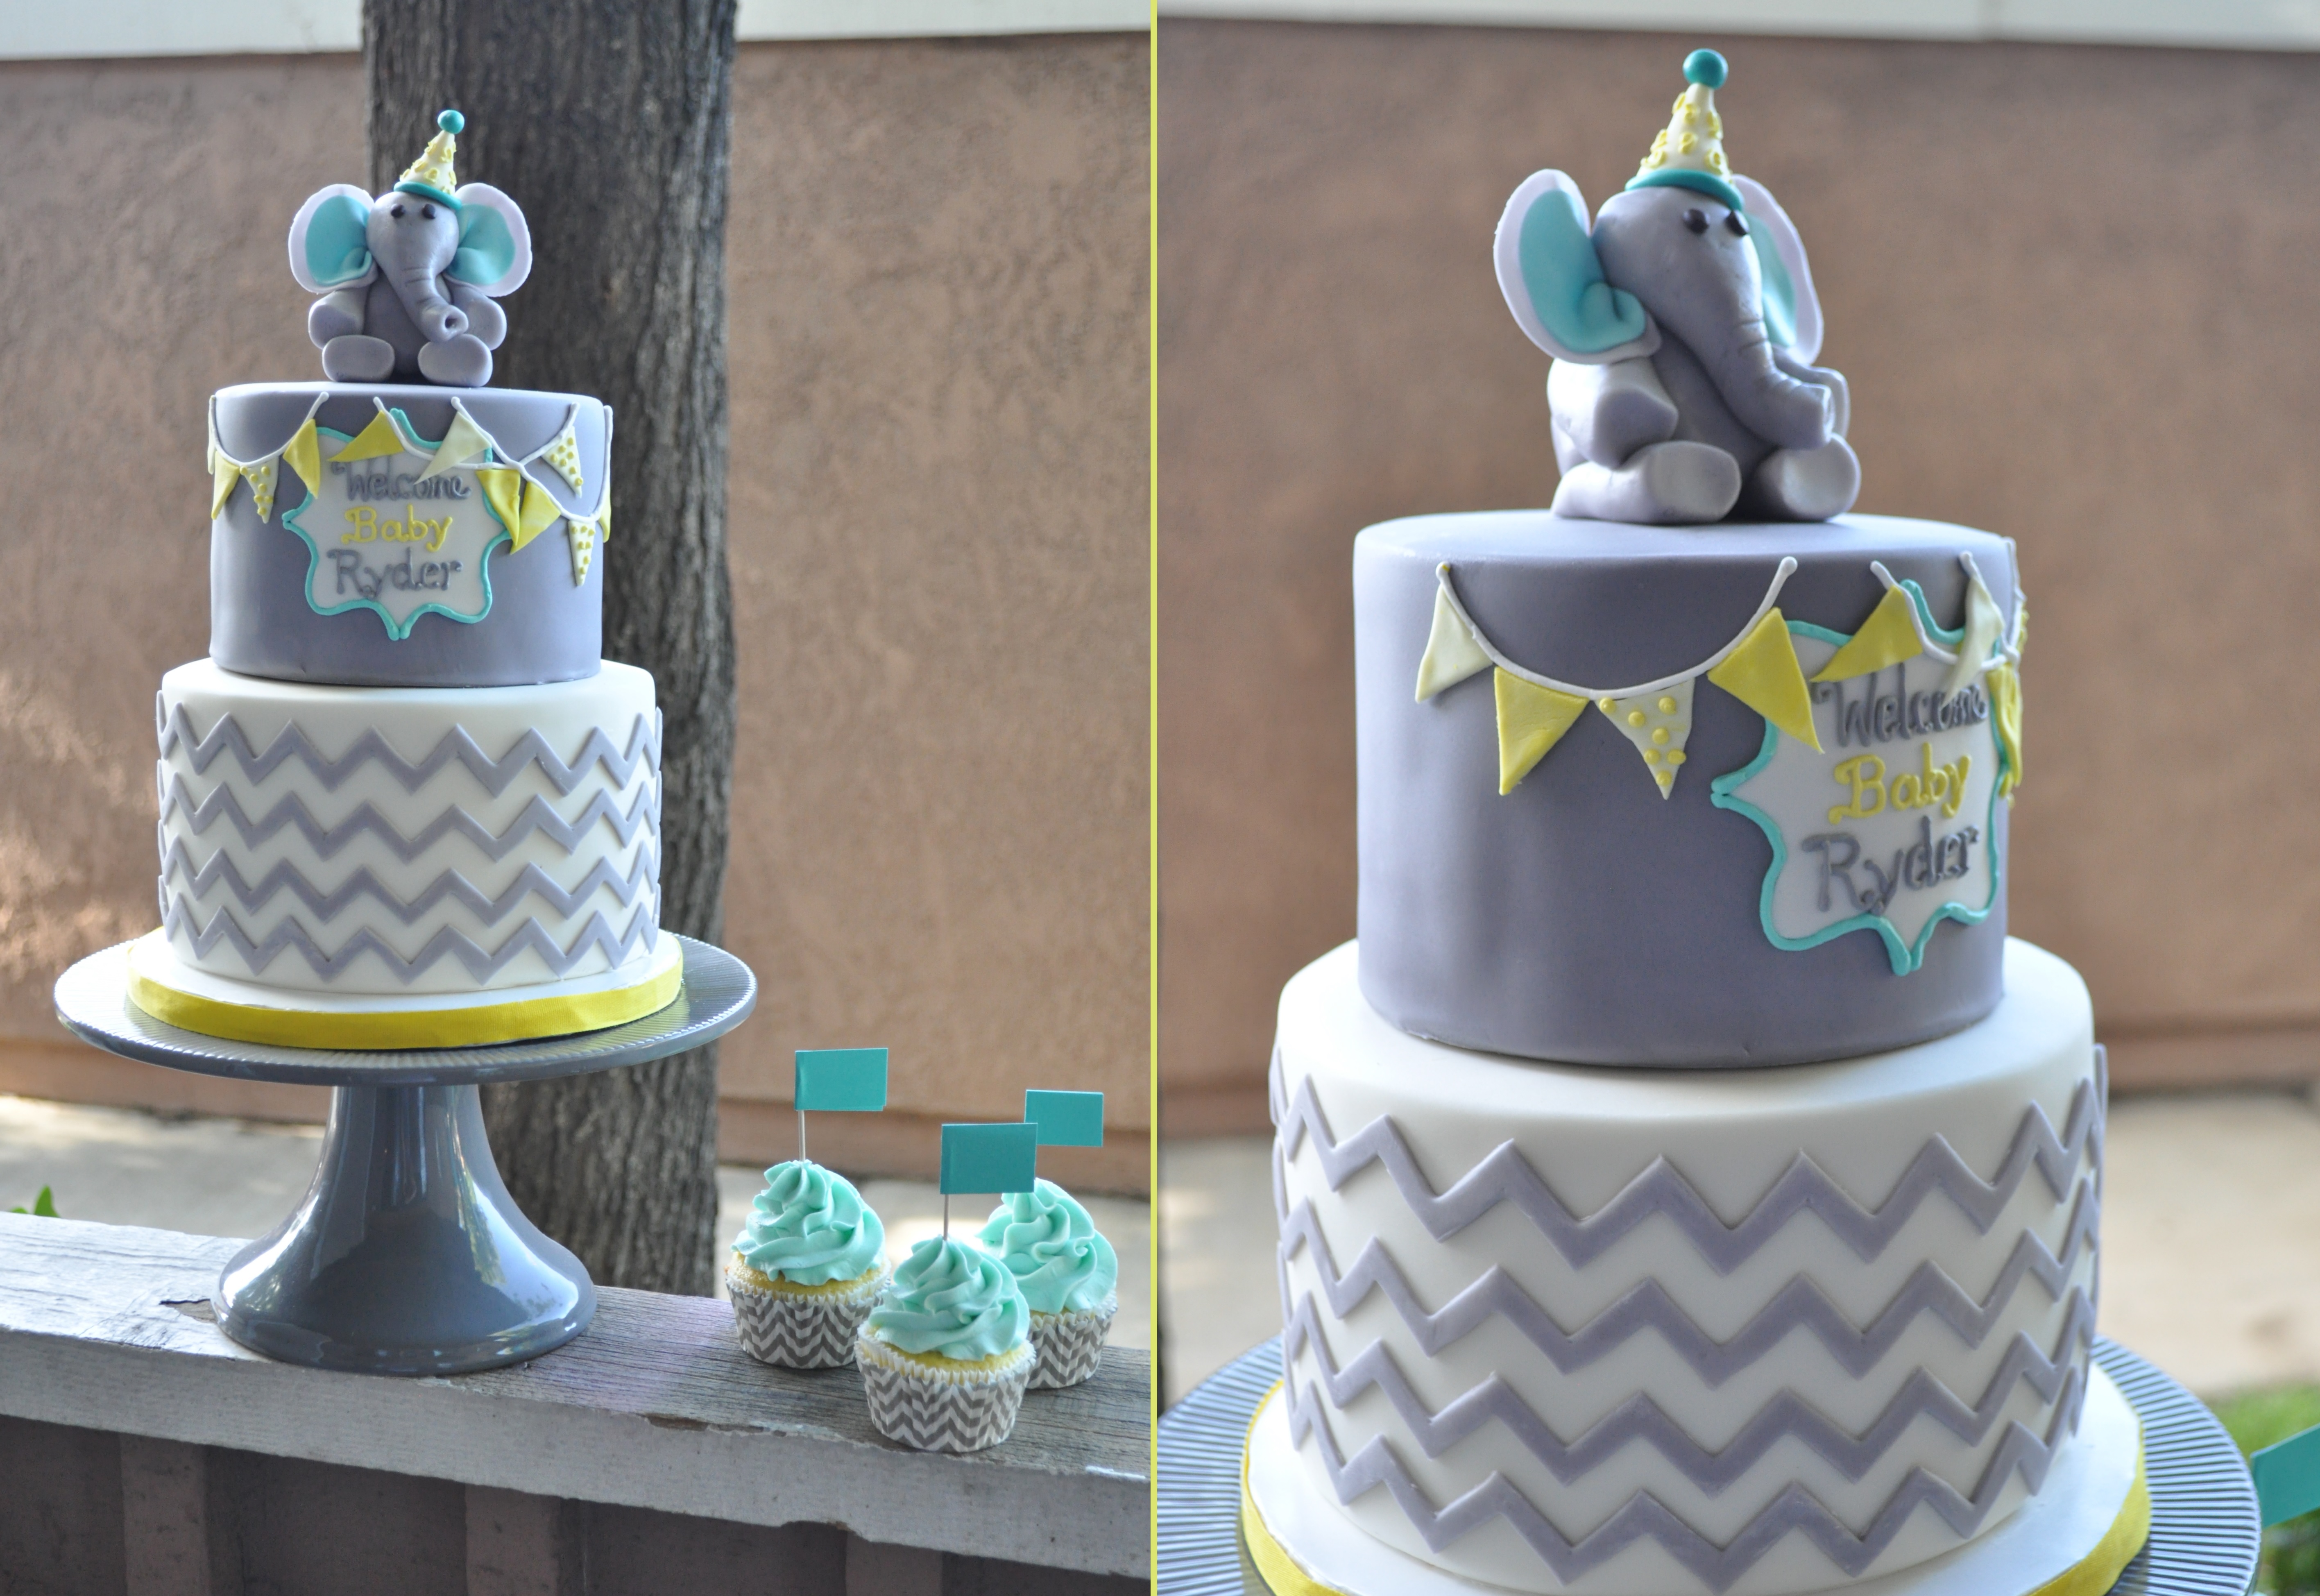 Chevron and Polka Dot Baby Shower  thebakeboutique